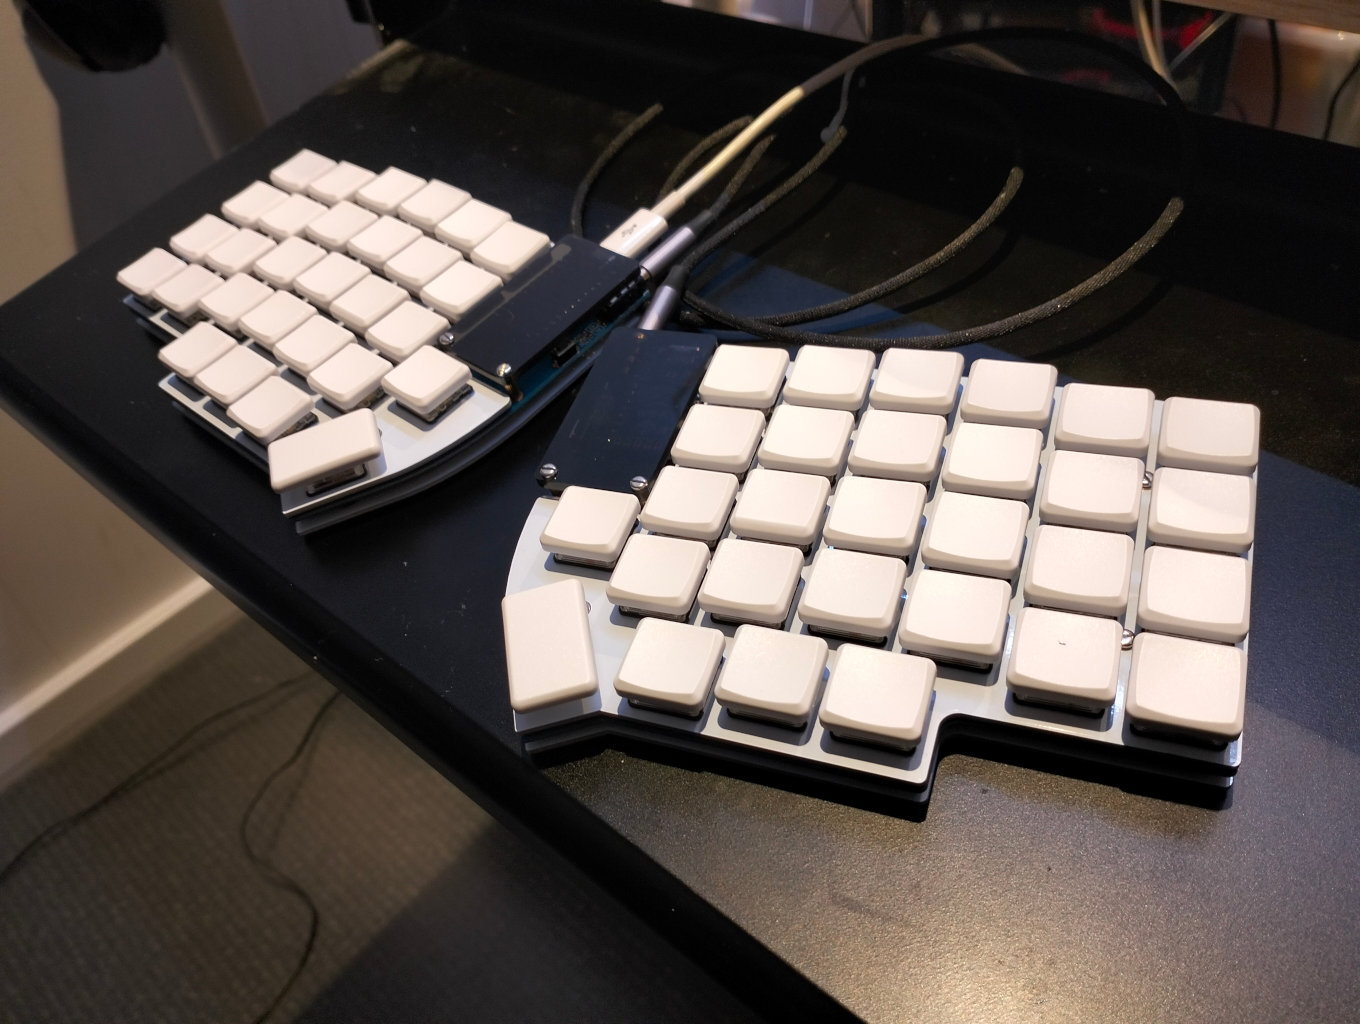 Lily58 split keyboard with low profile keys and white keycaps.